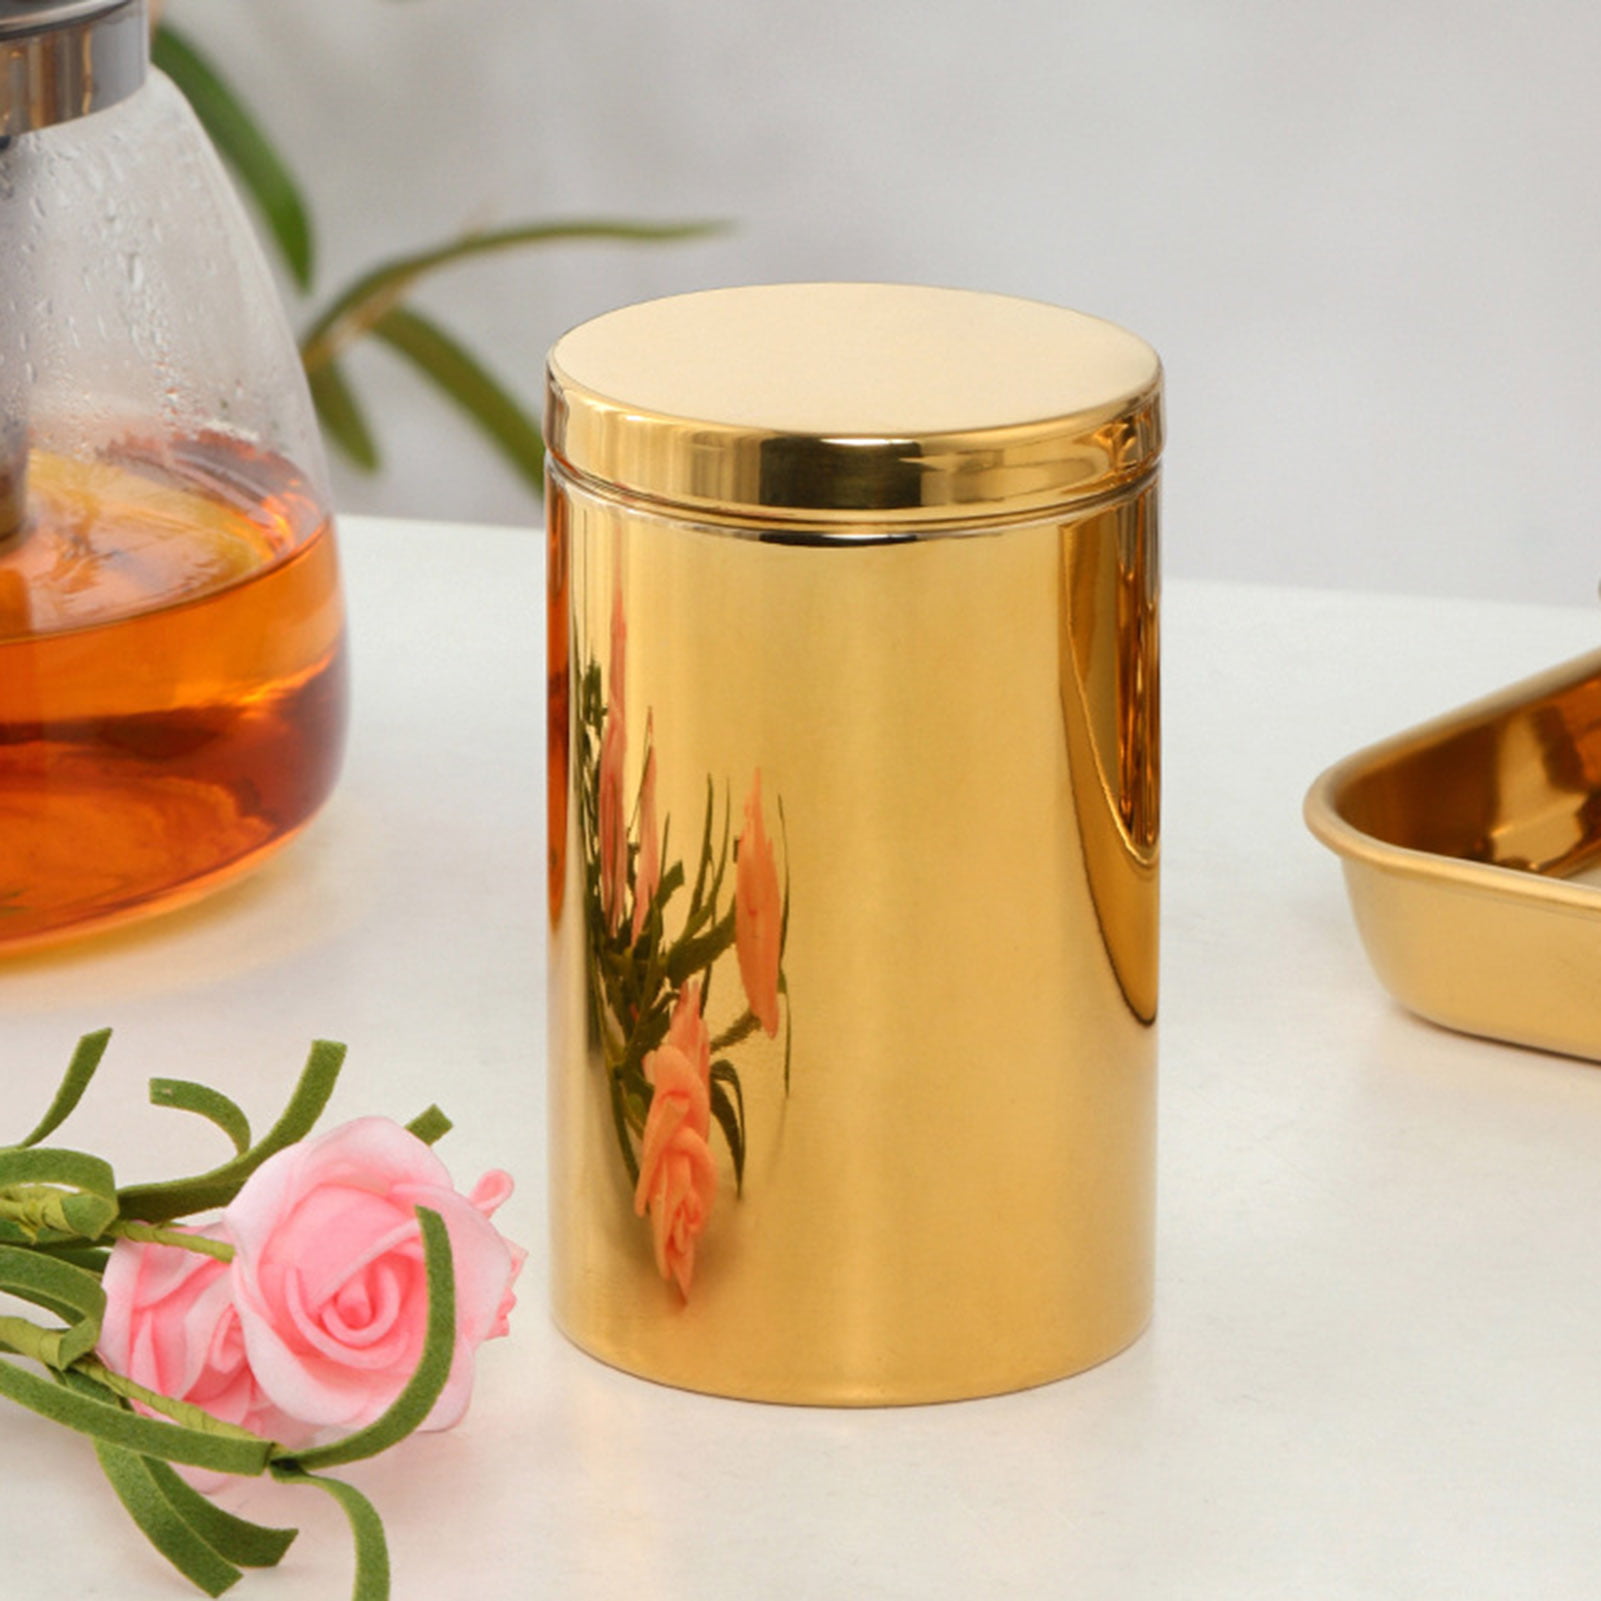 Gold Tea Leaves Container, Bubble Tea Kitchen Tool, Supplies